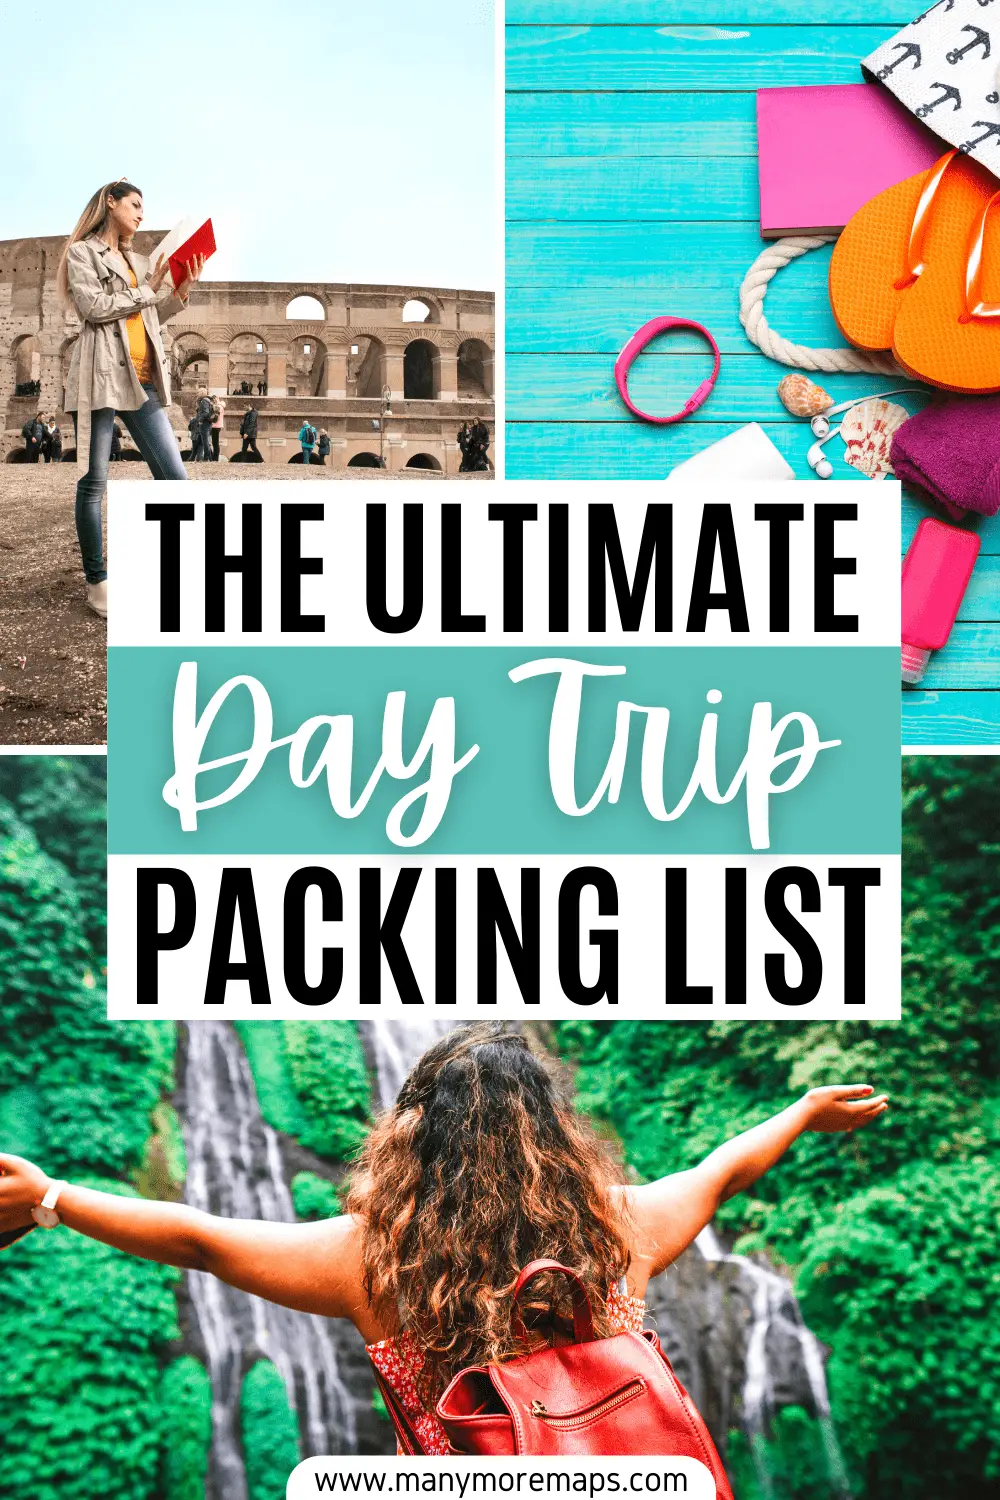 Planning a day trip and want to know what to pack? Check out this ultimate day trip packing list, which includes 11 essentials you need to bring with you on your travels!